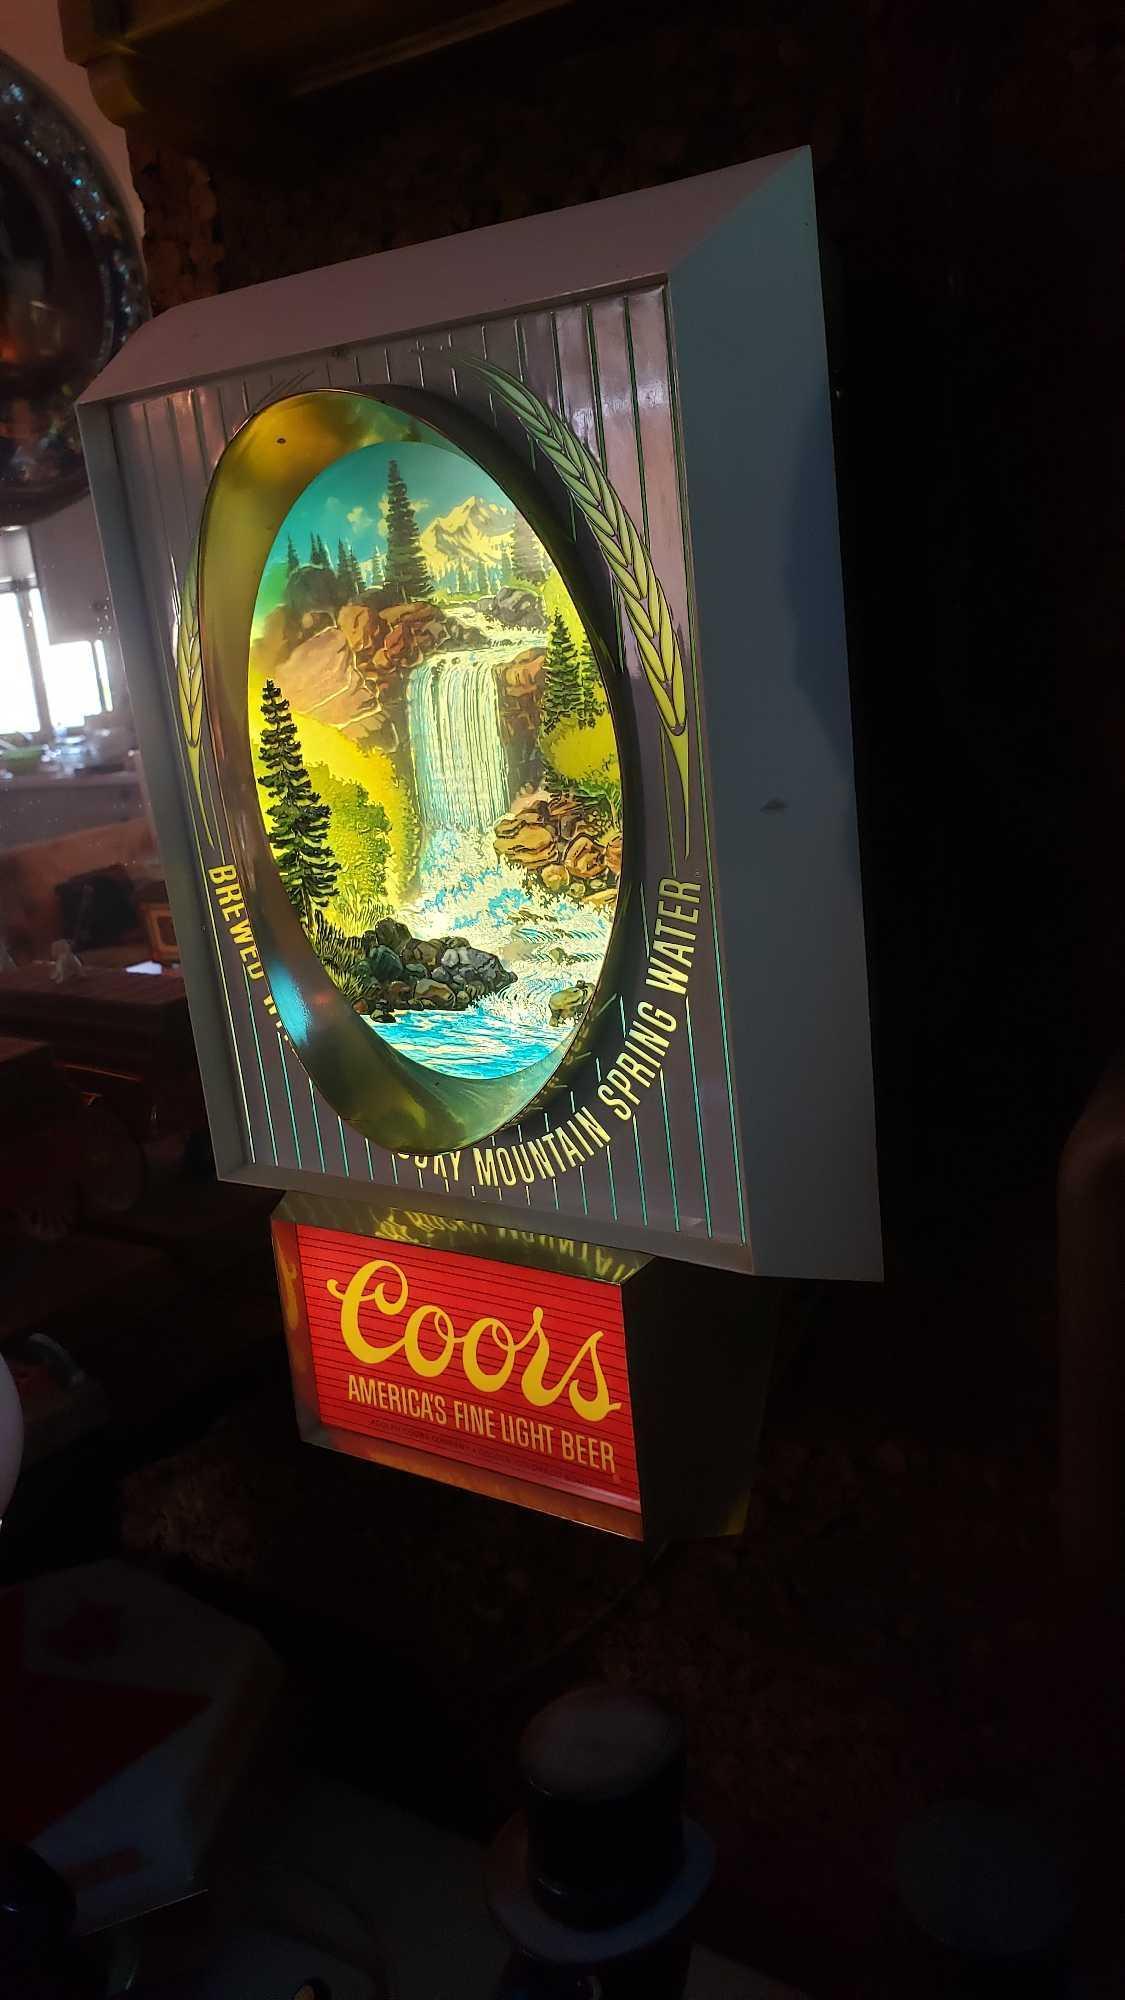 COORS WATERFALL LIGHT UP SIGN